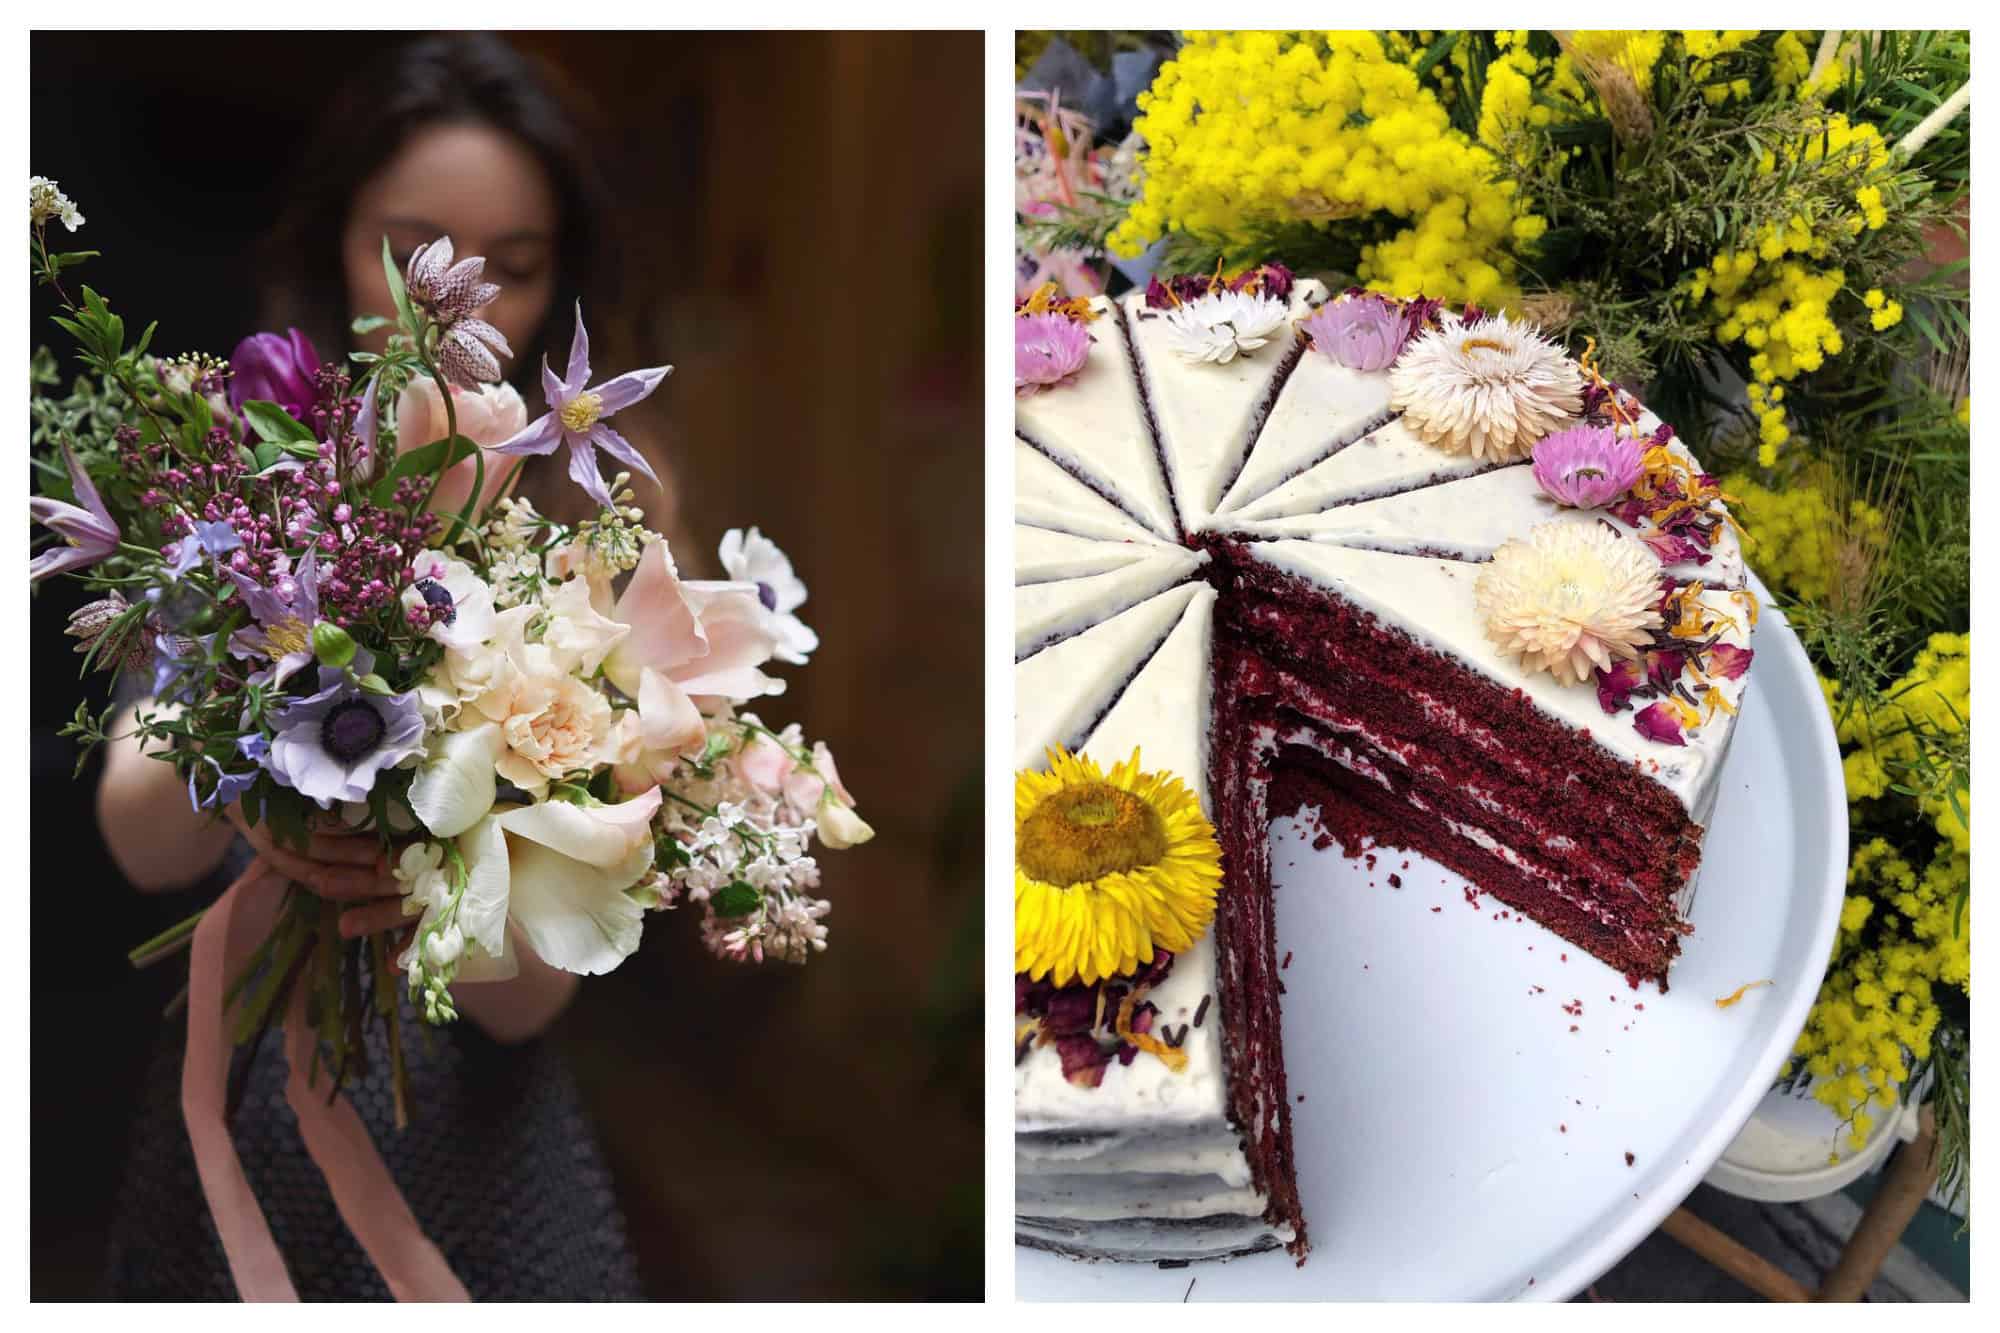 Peonies café in Paris is a great place to work as it's pleasant to be surrounded by bucolic bunches of flowers (left) and to be able to dig into delicious cakes (right). 